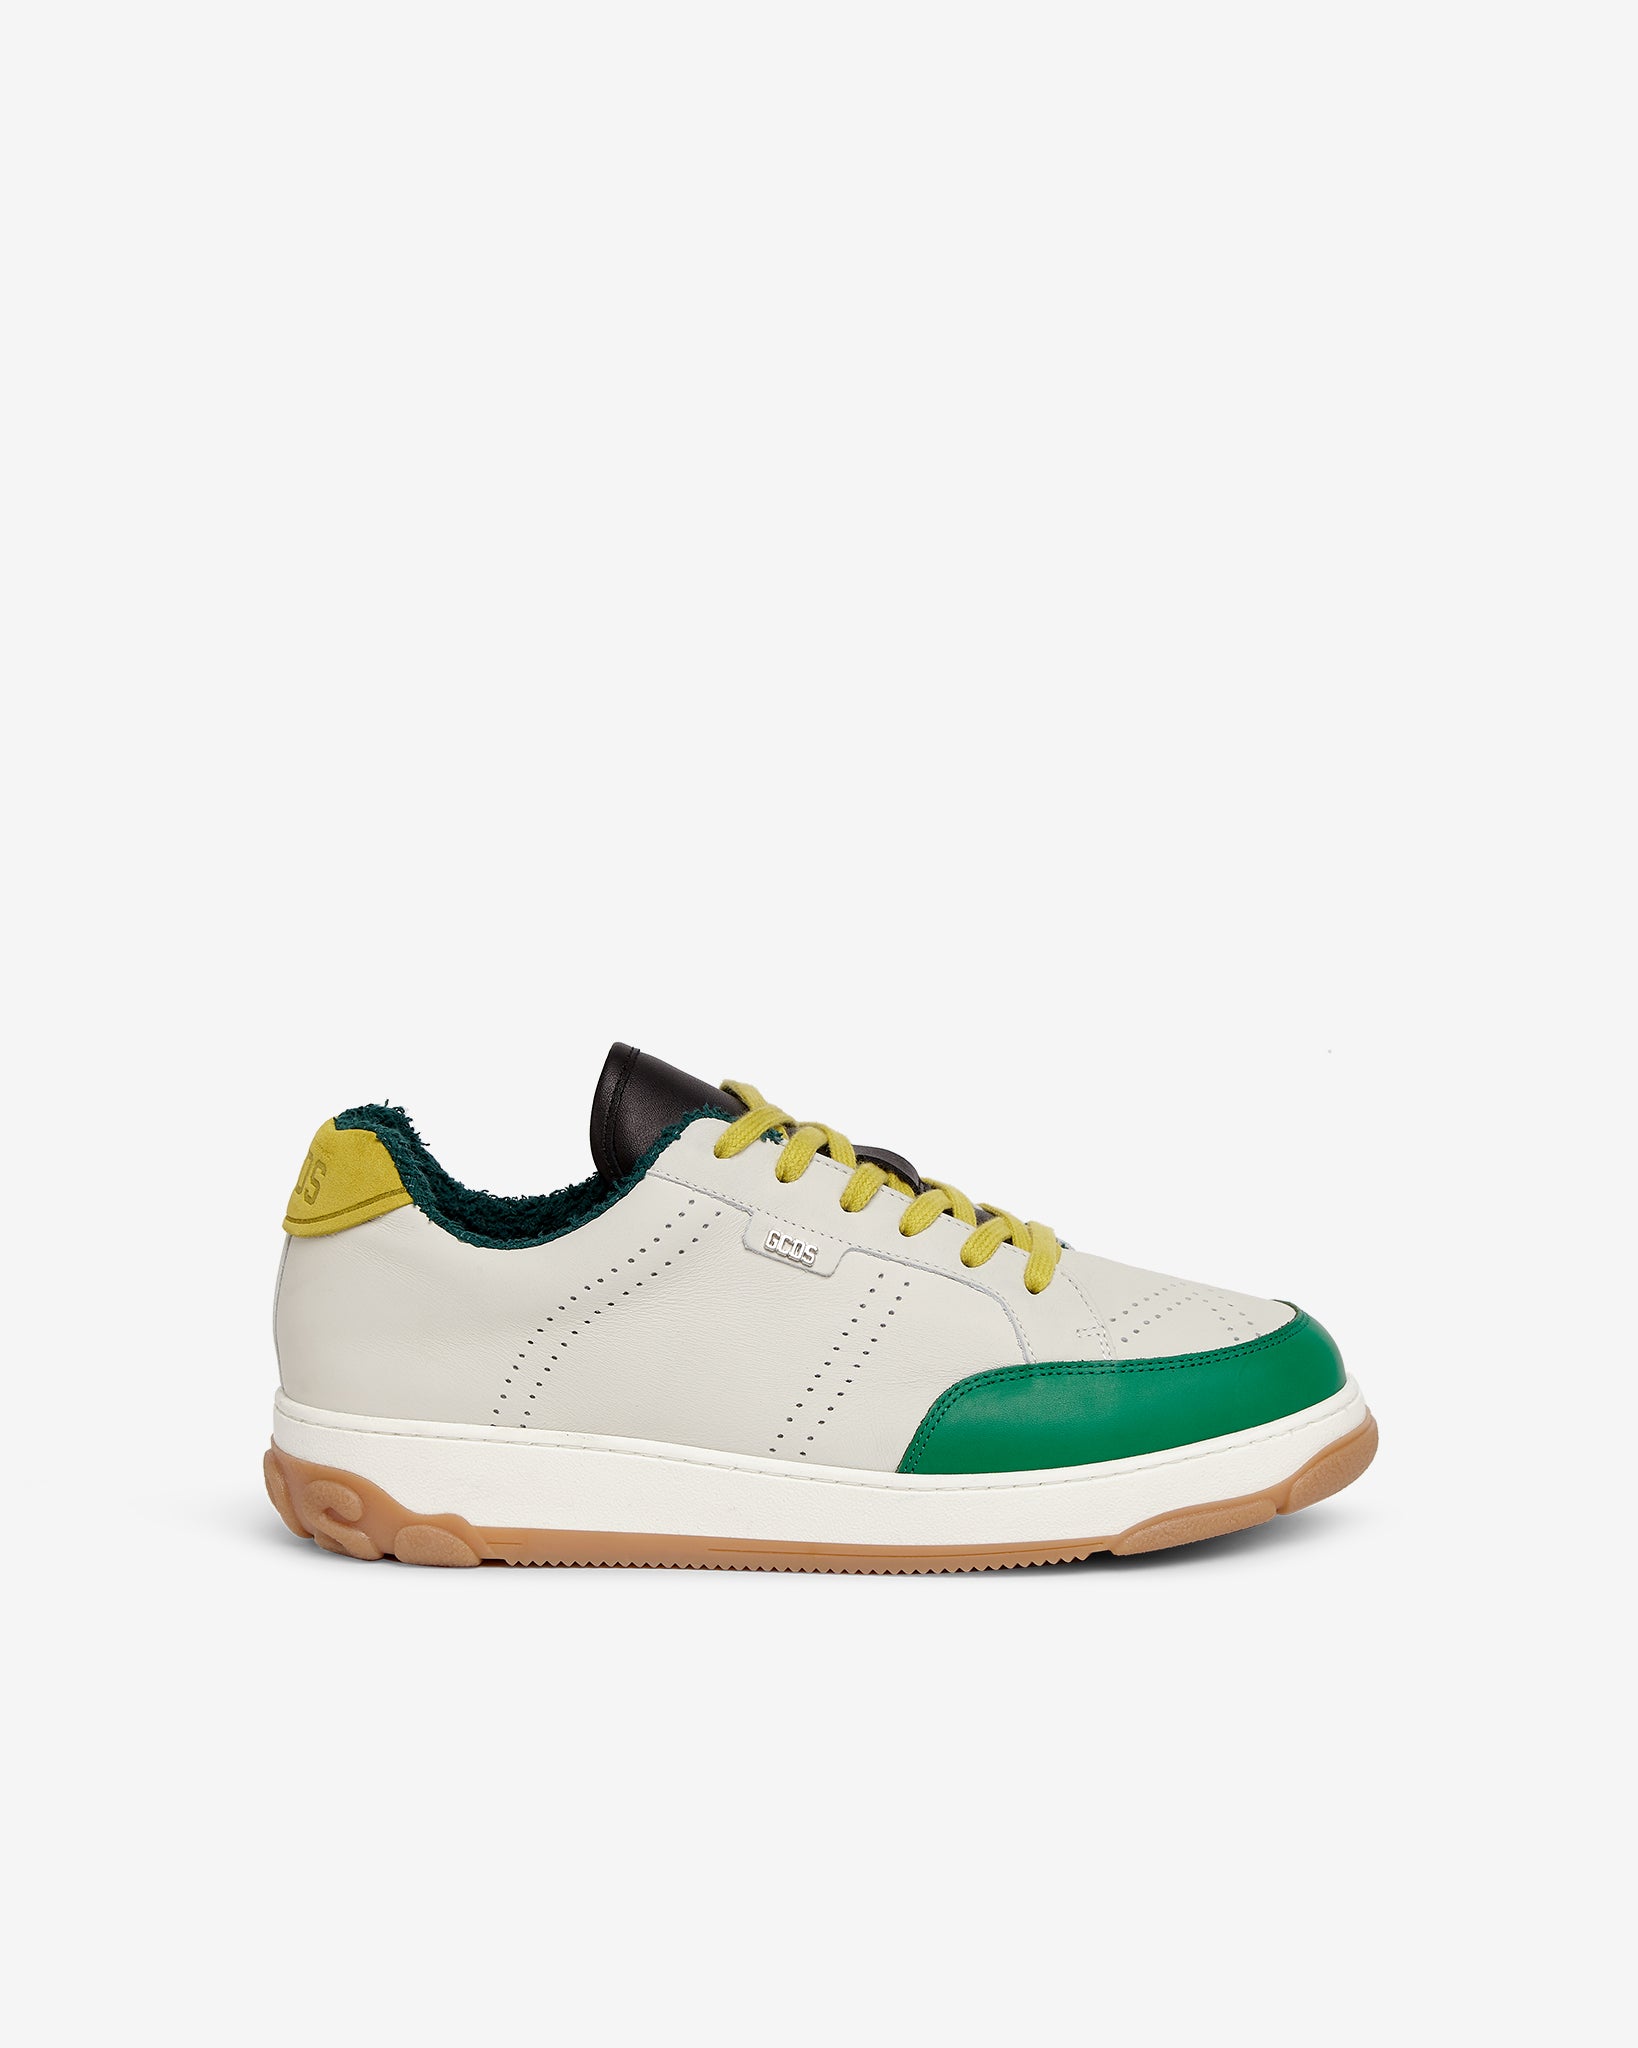 Essential Nami Sneakers : Unisex Shoes Lime